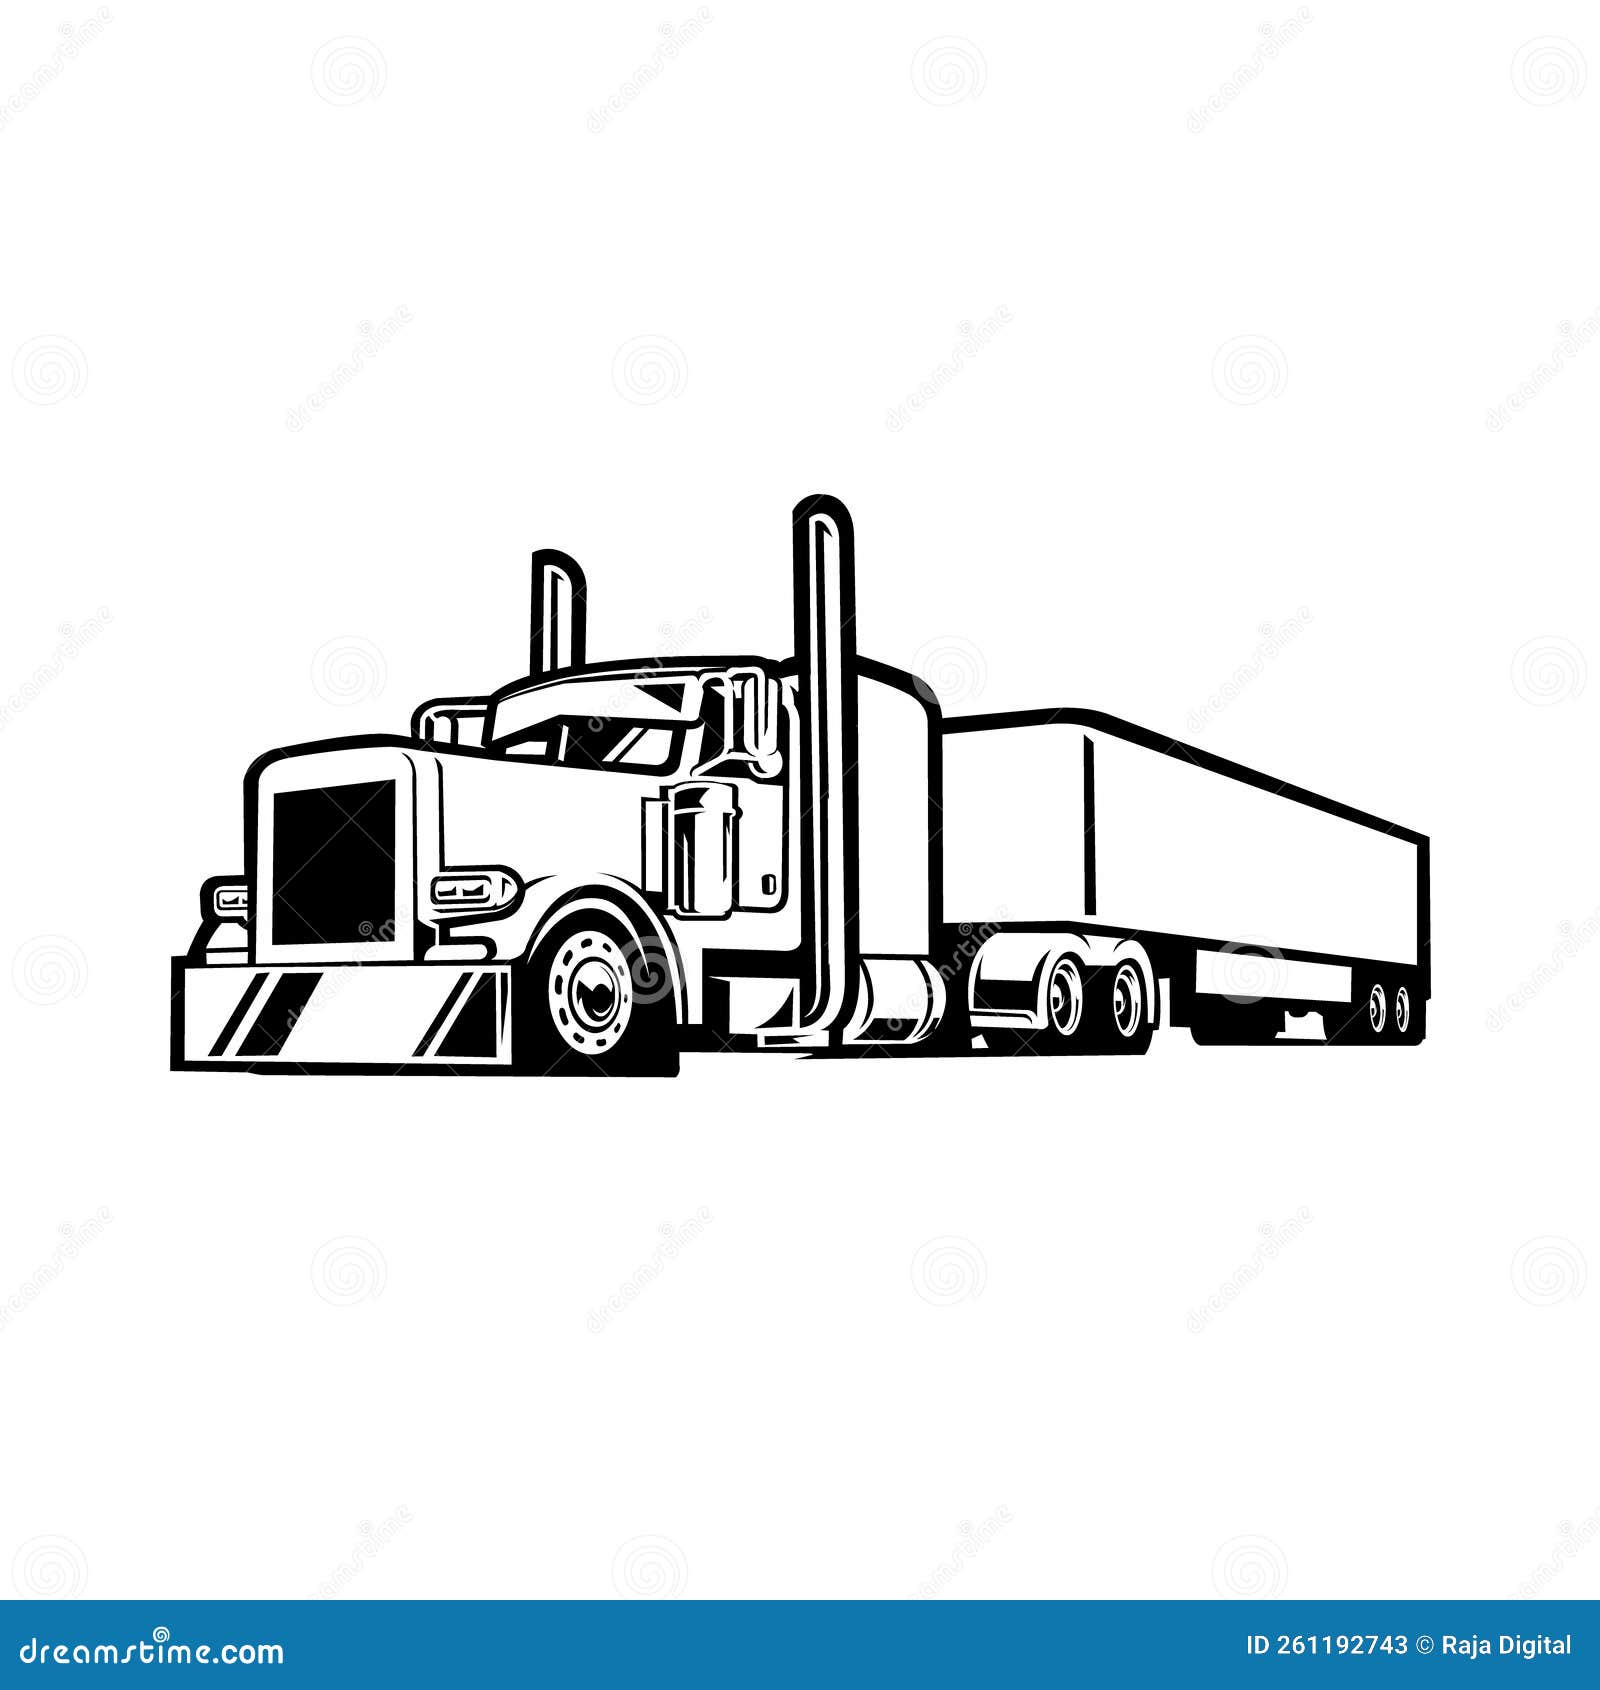 premium semi truck 18 wheeler trailer silhouette monochrome . best fro trucking and freight related industry